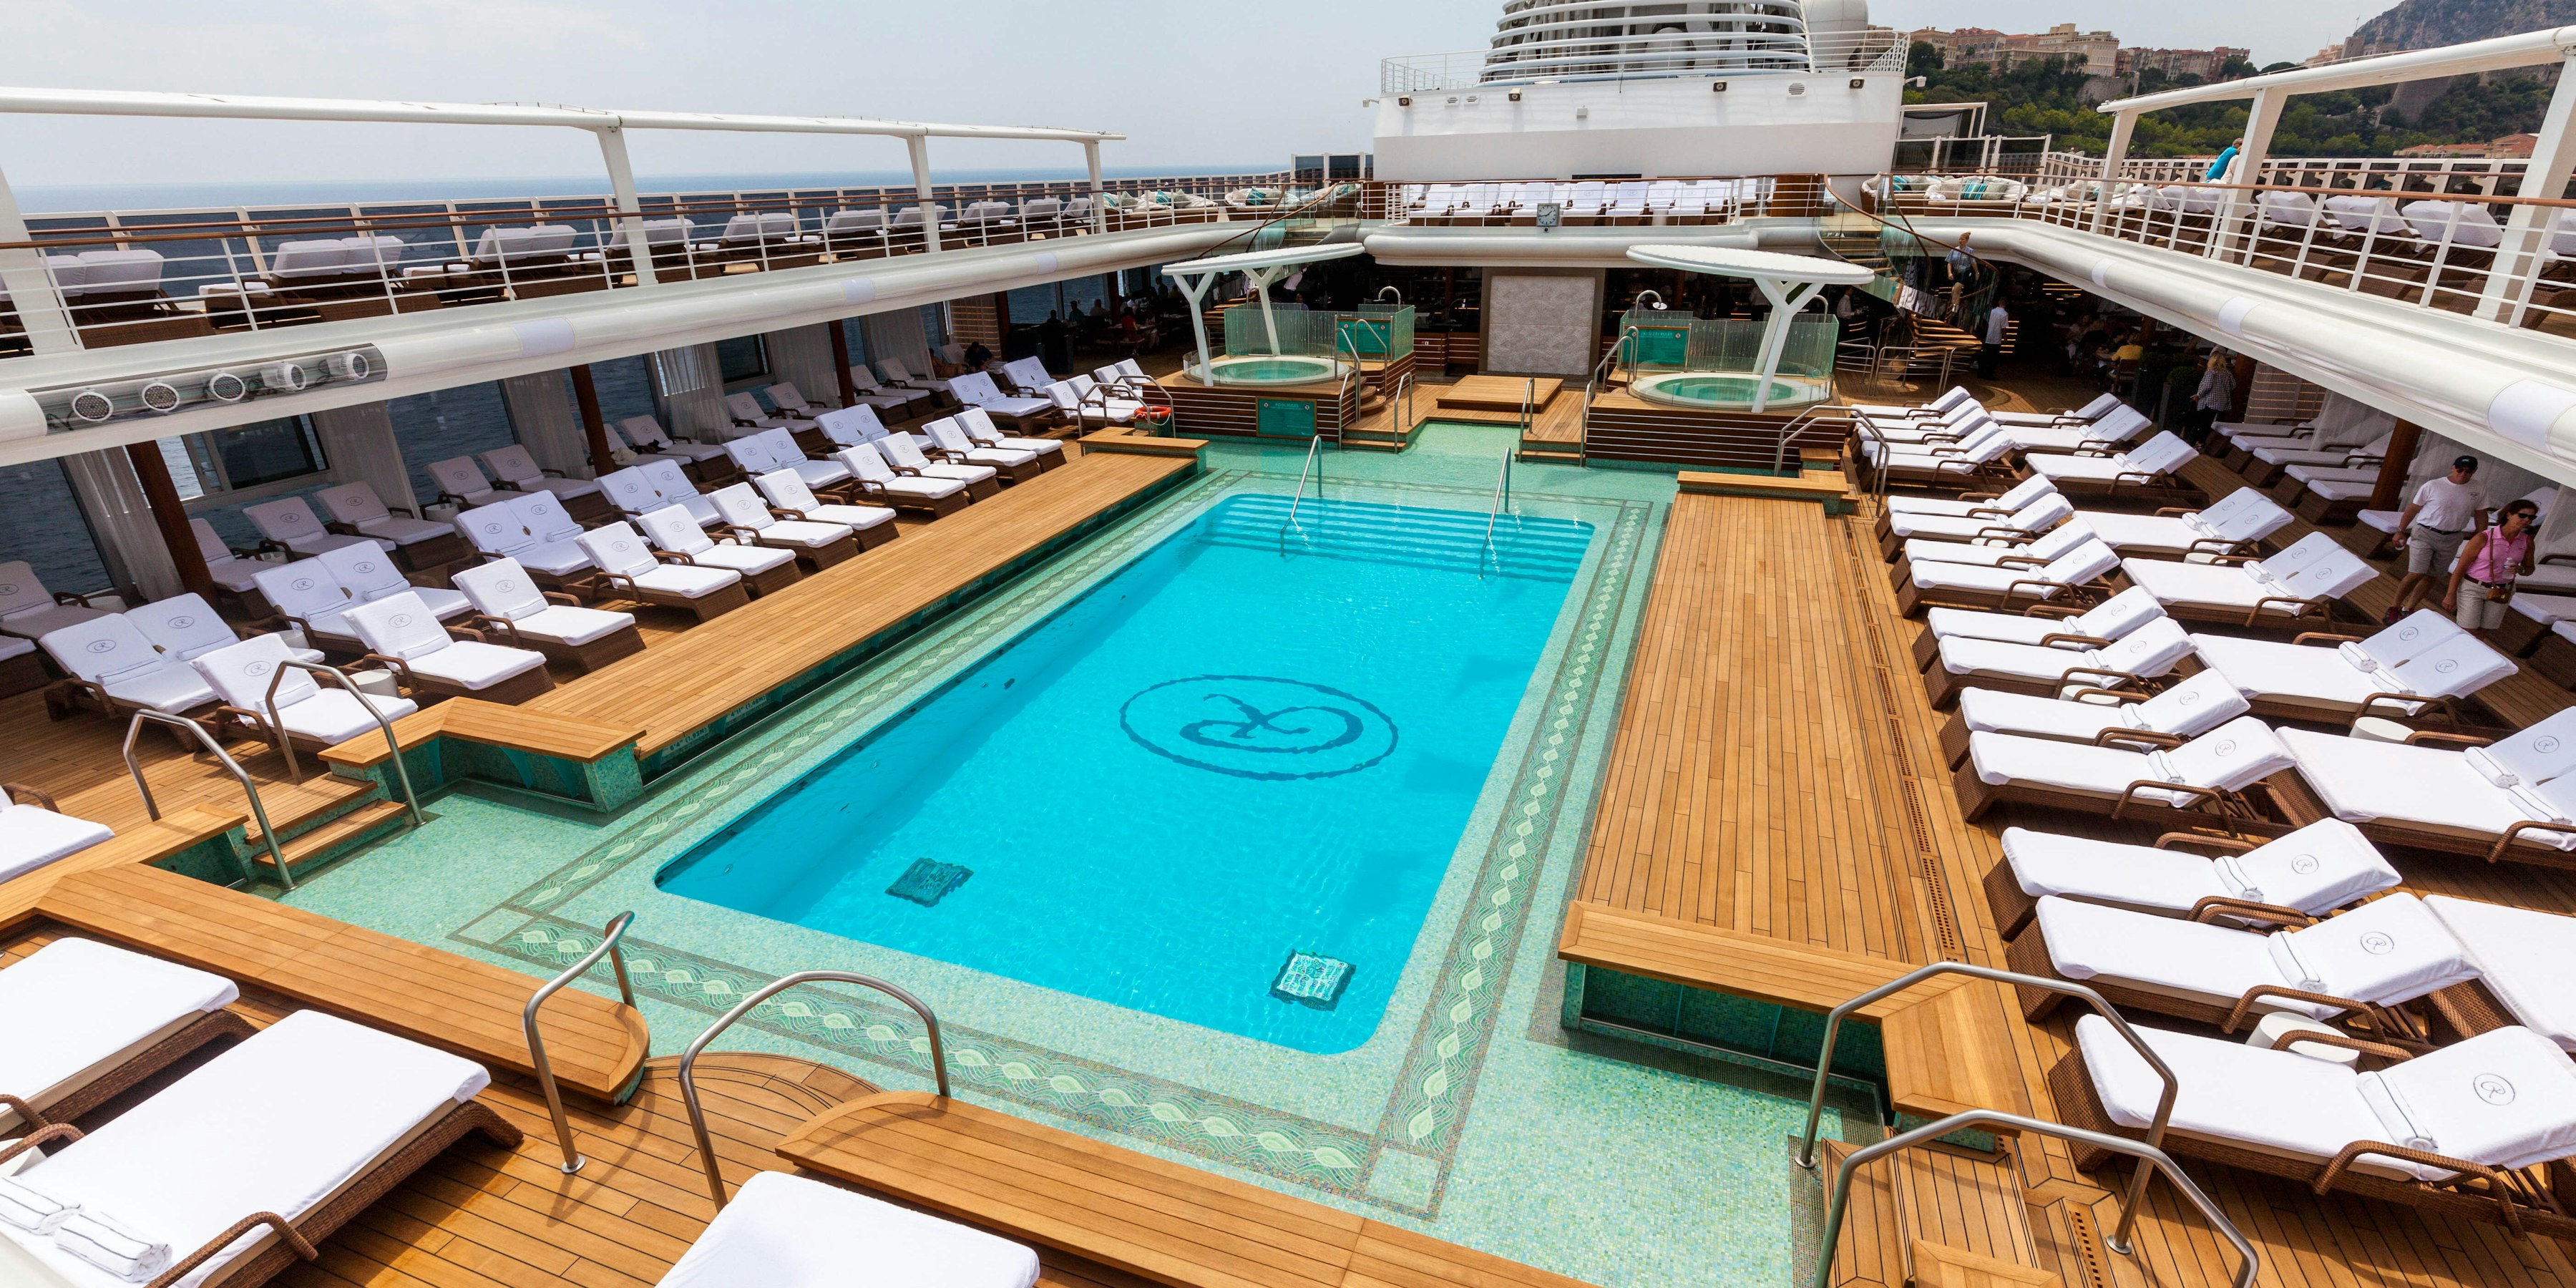 celebrity cruise ships adults only